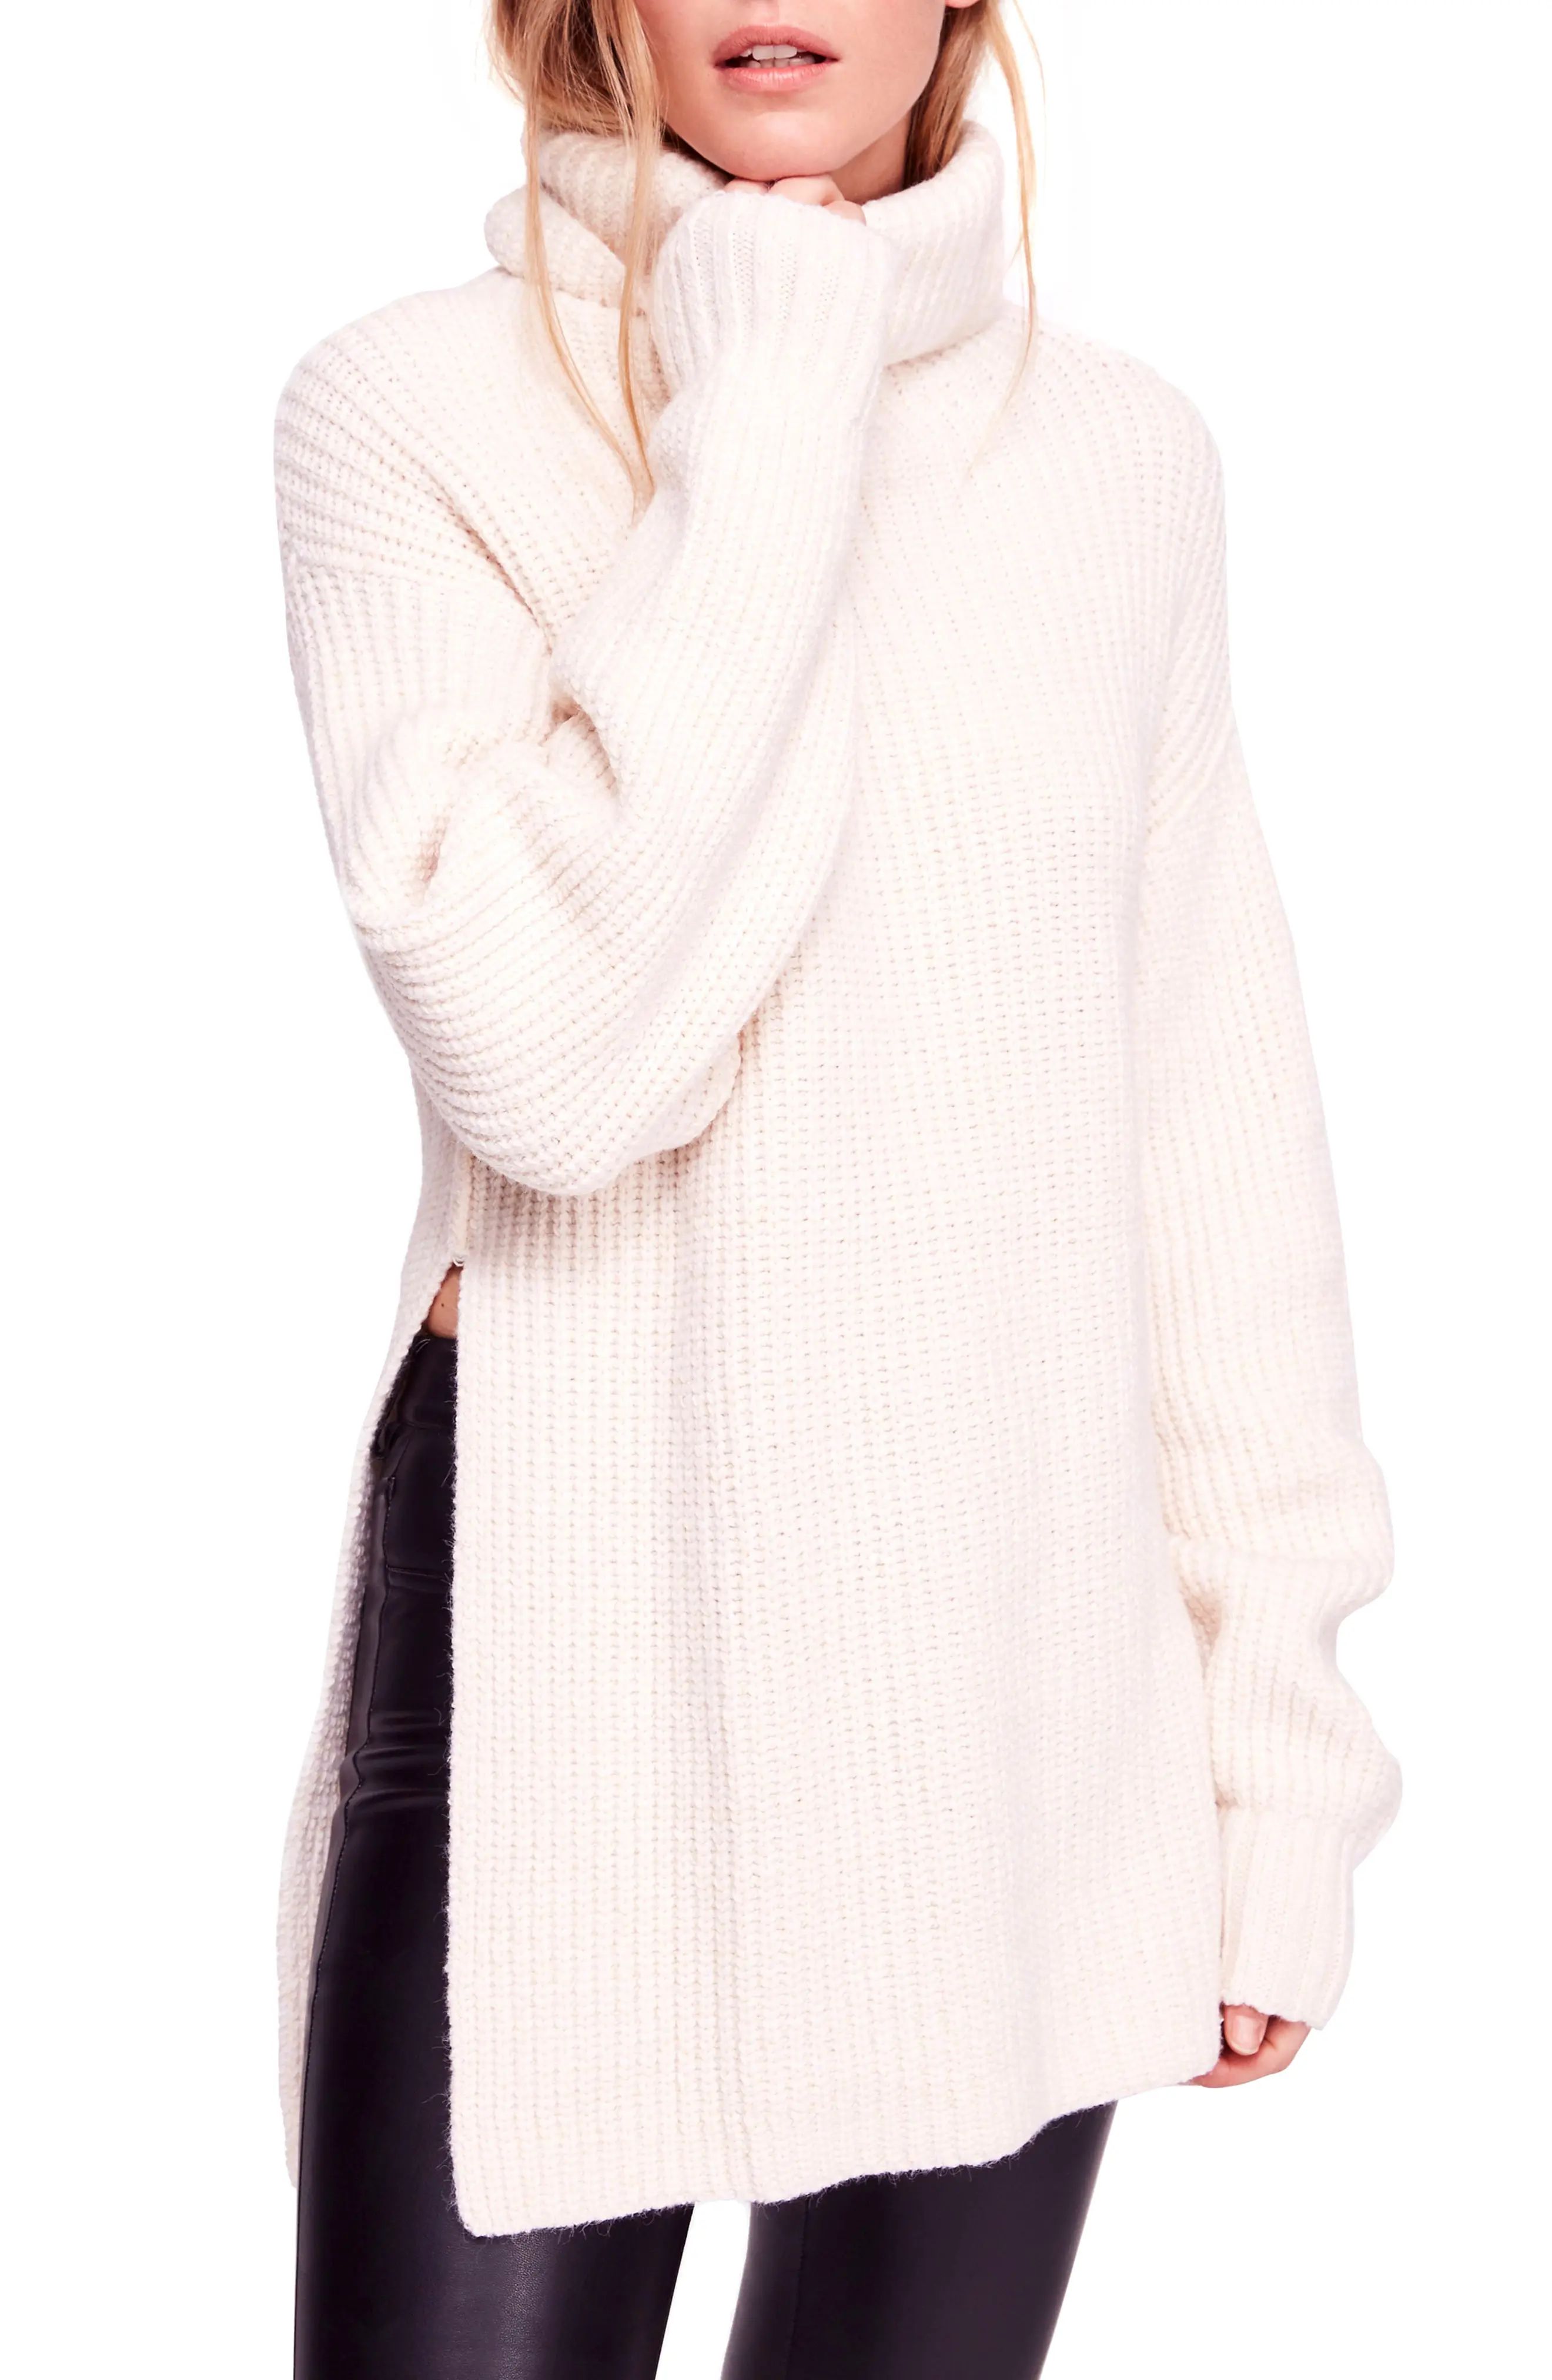 Women's Free People Eleven Turtleneck Sweater, Size X-Small - Ivory | Nordstrom